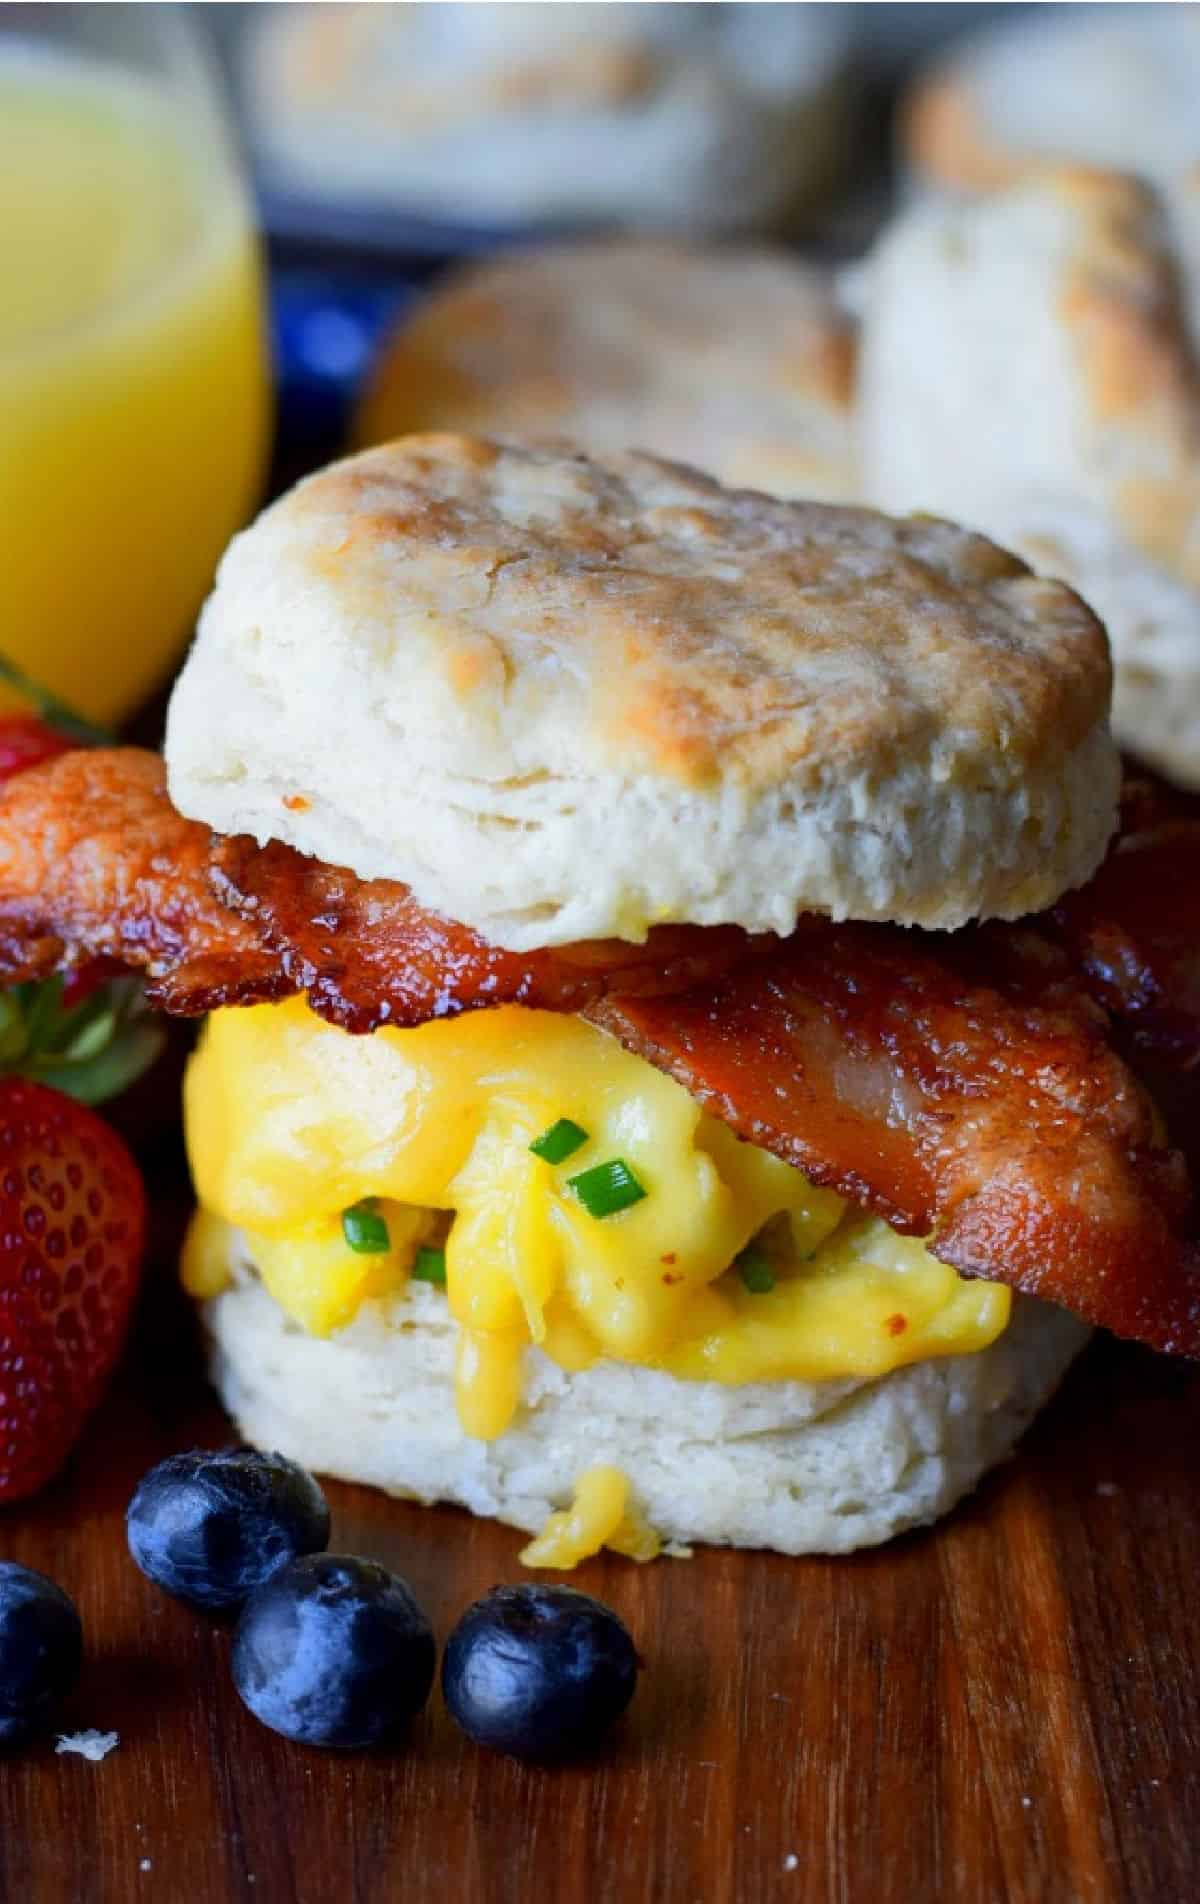 Bacon egg and cheese biscuit with a side of fruit